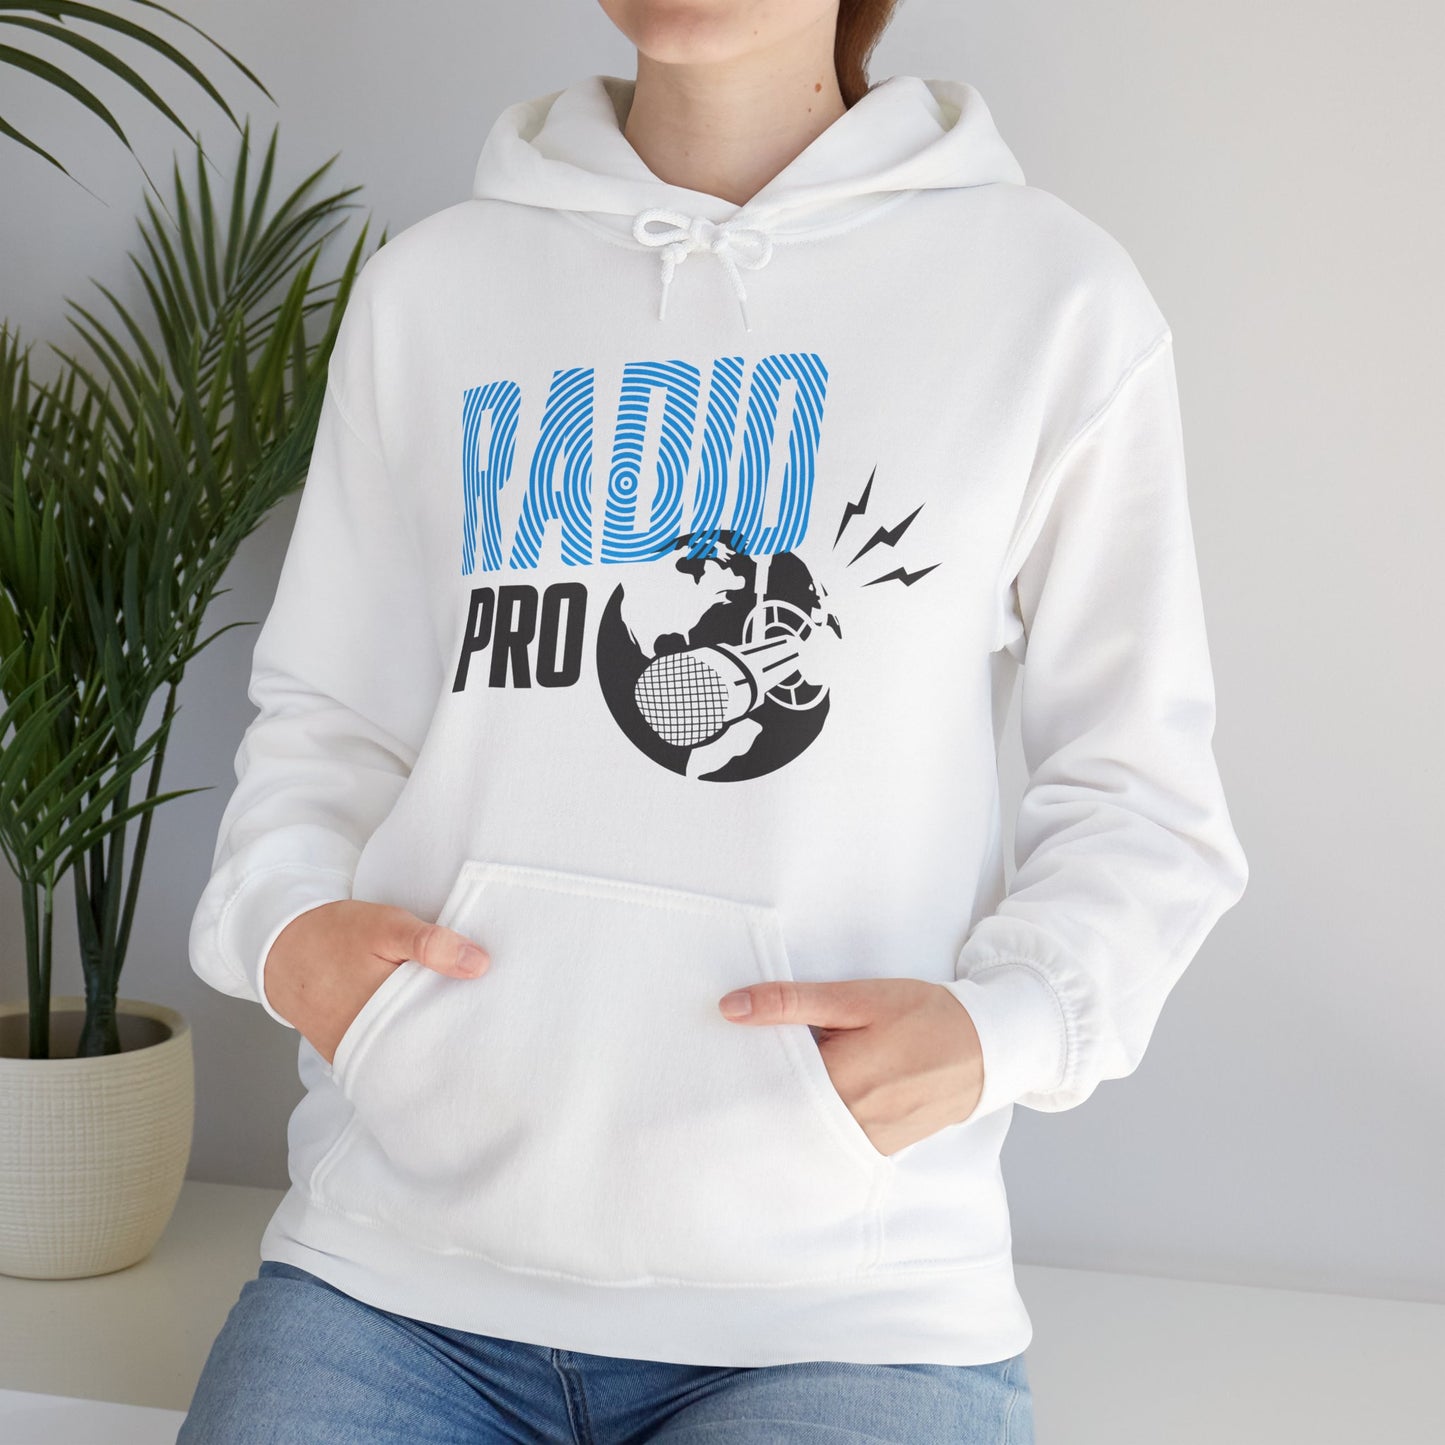 Radio T-Shirt for Radio DJs and Music Industry pros